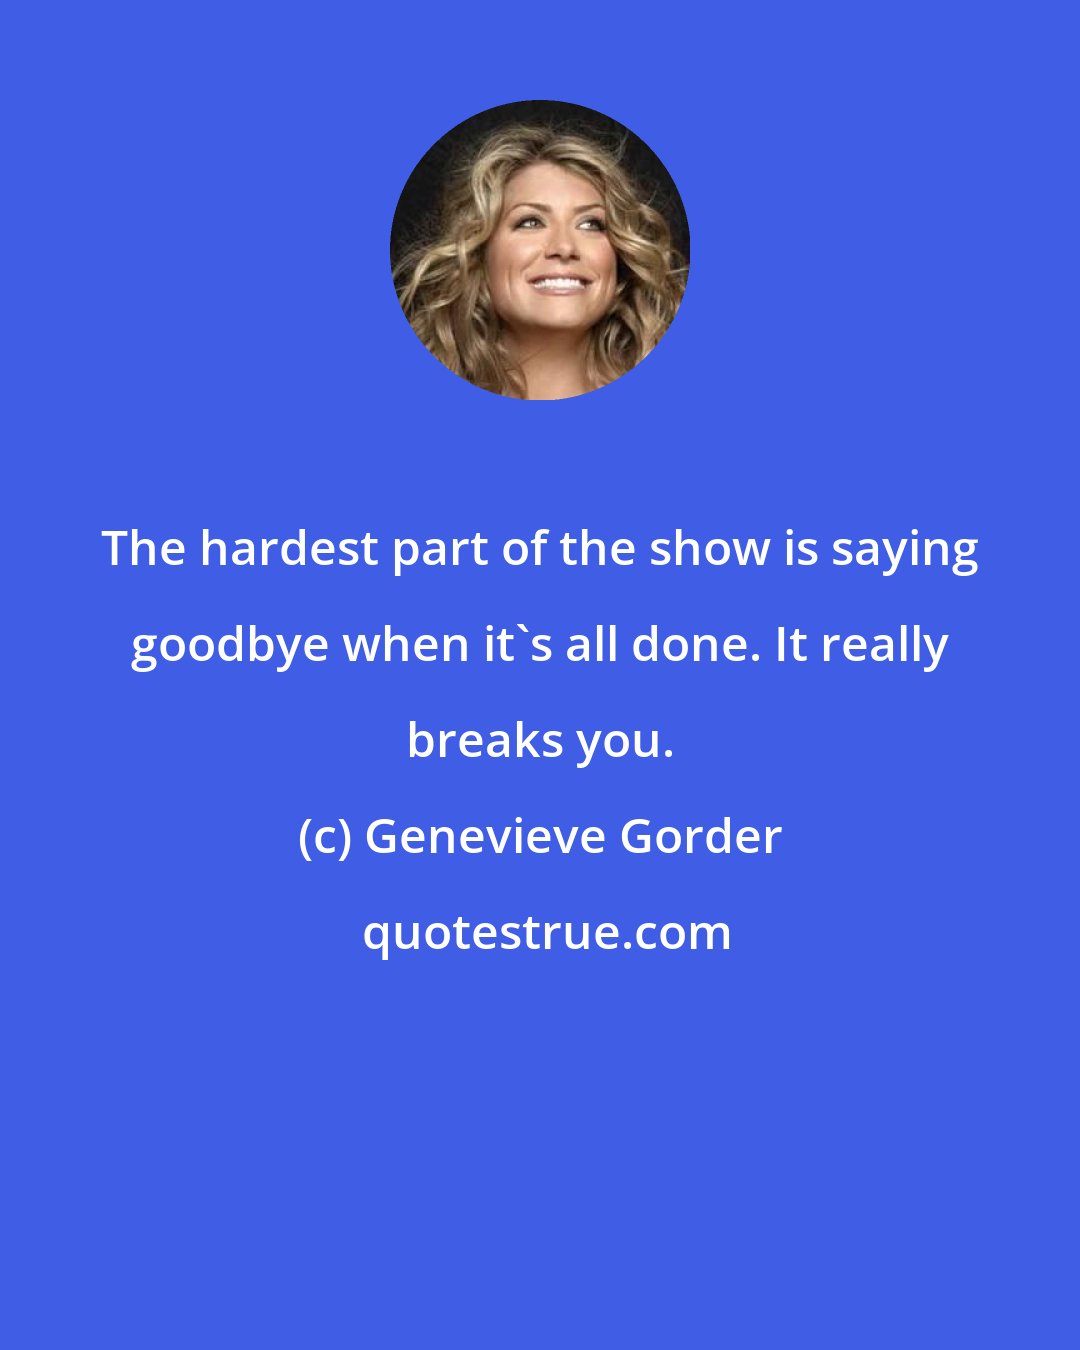 Genevieve Gorder: The hardest part of the show is saying goodbye when it's all done. It really breaks you.